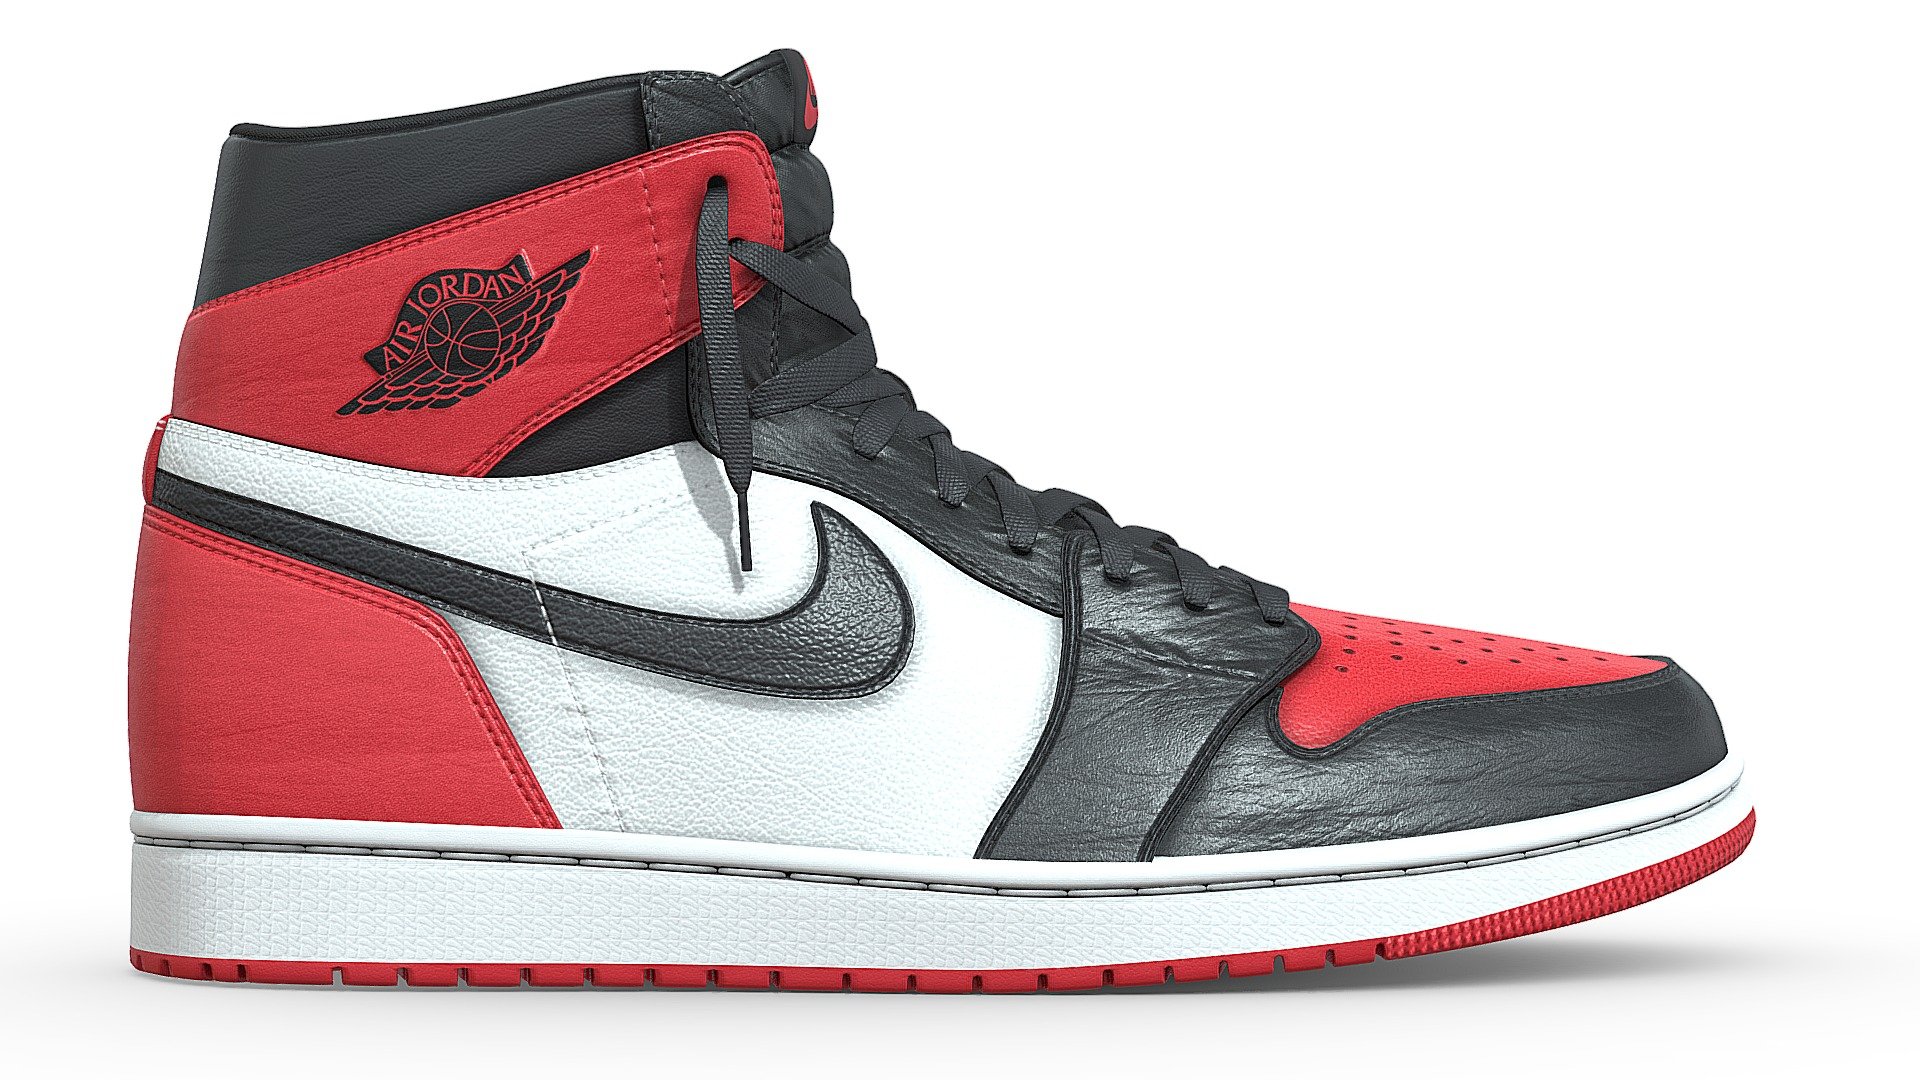 Jordan 1 silhouette in the Bred Toe Colourway. A modern take on a classic design, this sleek colourway pays homage to the Chicago Bulls. A black leather toe is complemented by hits of red on the heel, collar, toe box, and outsole. 

Modelled in Blender and textured in Substance, no detail went overlooked in the creation of this shoe. As a result it is subdivision ready. Unwrapped with efficiency in mind both left and right shoes are mostly identical, save for logos and text that cannot be mirrored. This was done to save on having 8 texture sets instead of 4, most of the unwrapped mesh of one shoe overlaps with the other.

An alternate version of the shoe, which combines those 4 texture sets into just 1 is available, along with lace colour variations 3d model